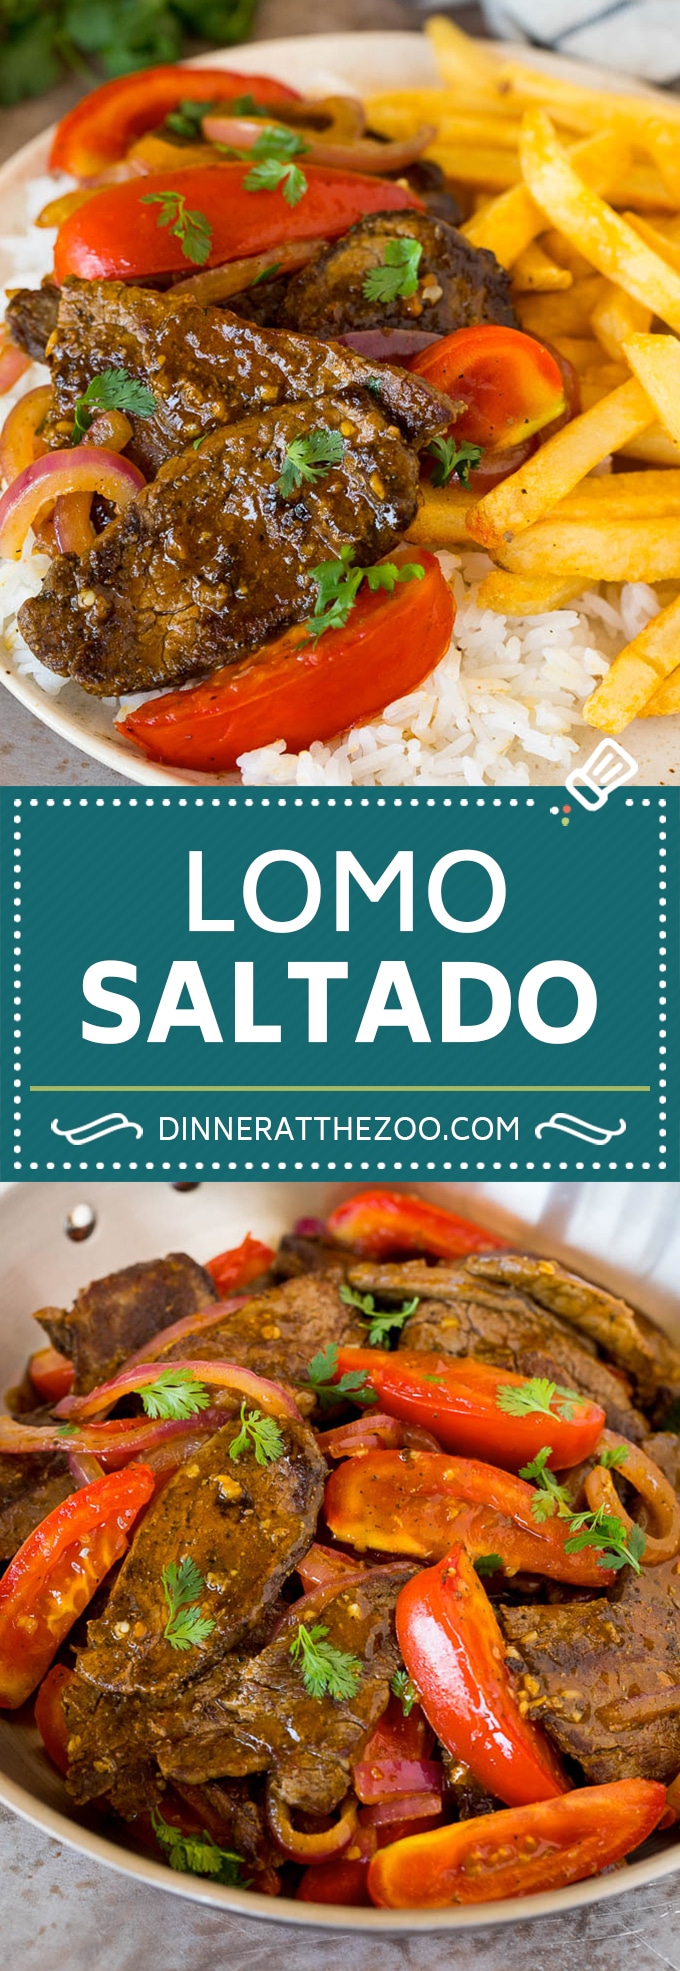 This lomo saltado is a classic Peruvian dish of tender beef that's stir fried with tomatoes and onions in a savory sauce, then served with french fries and steamed rice.